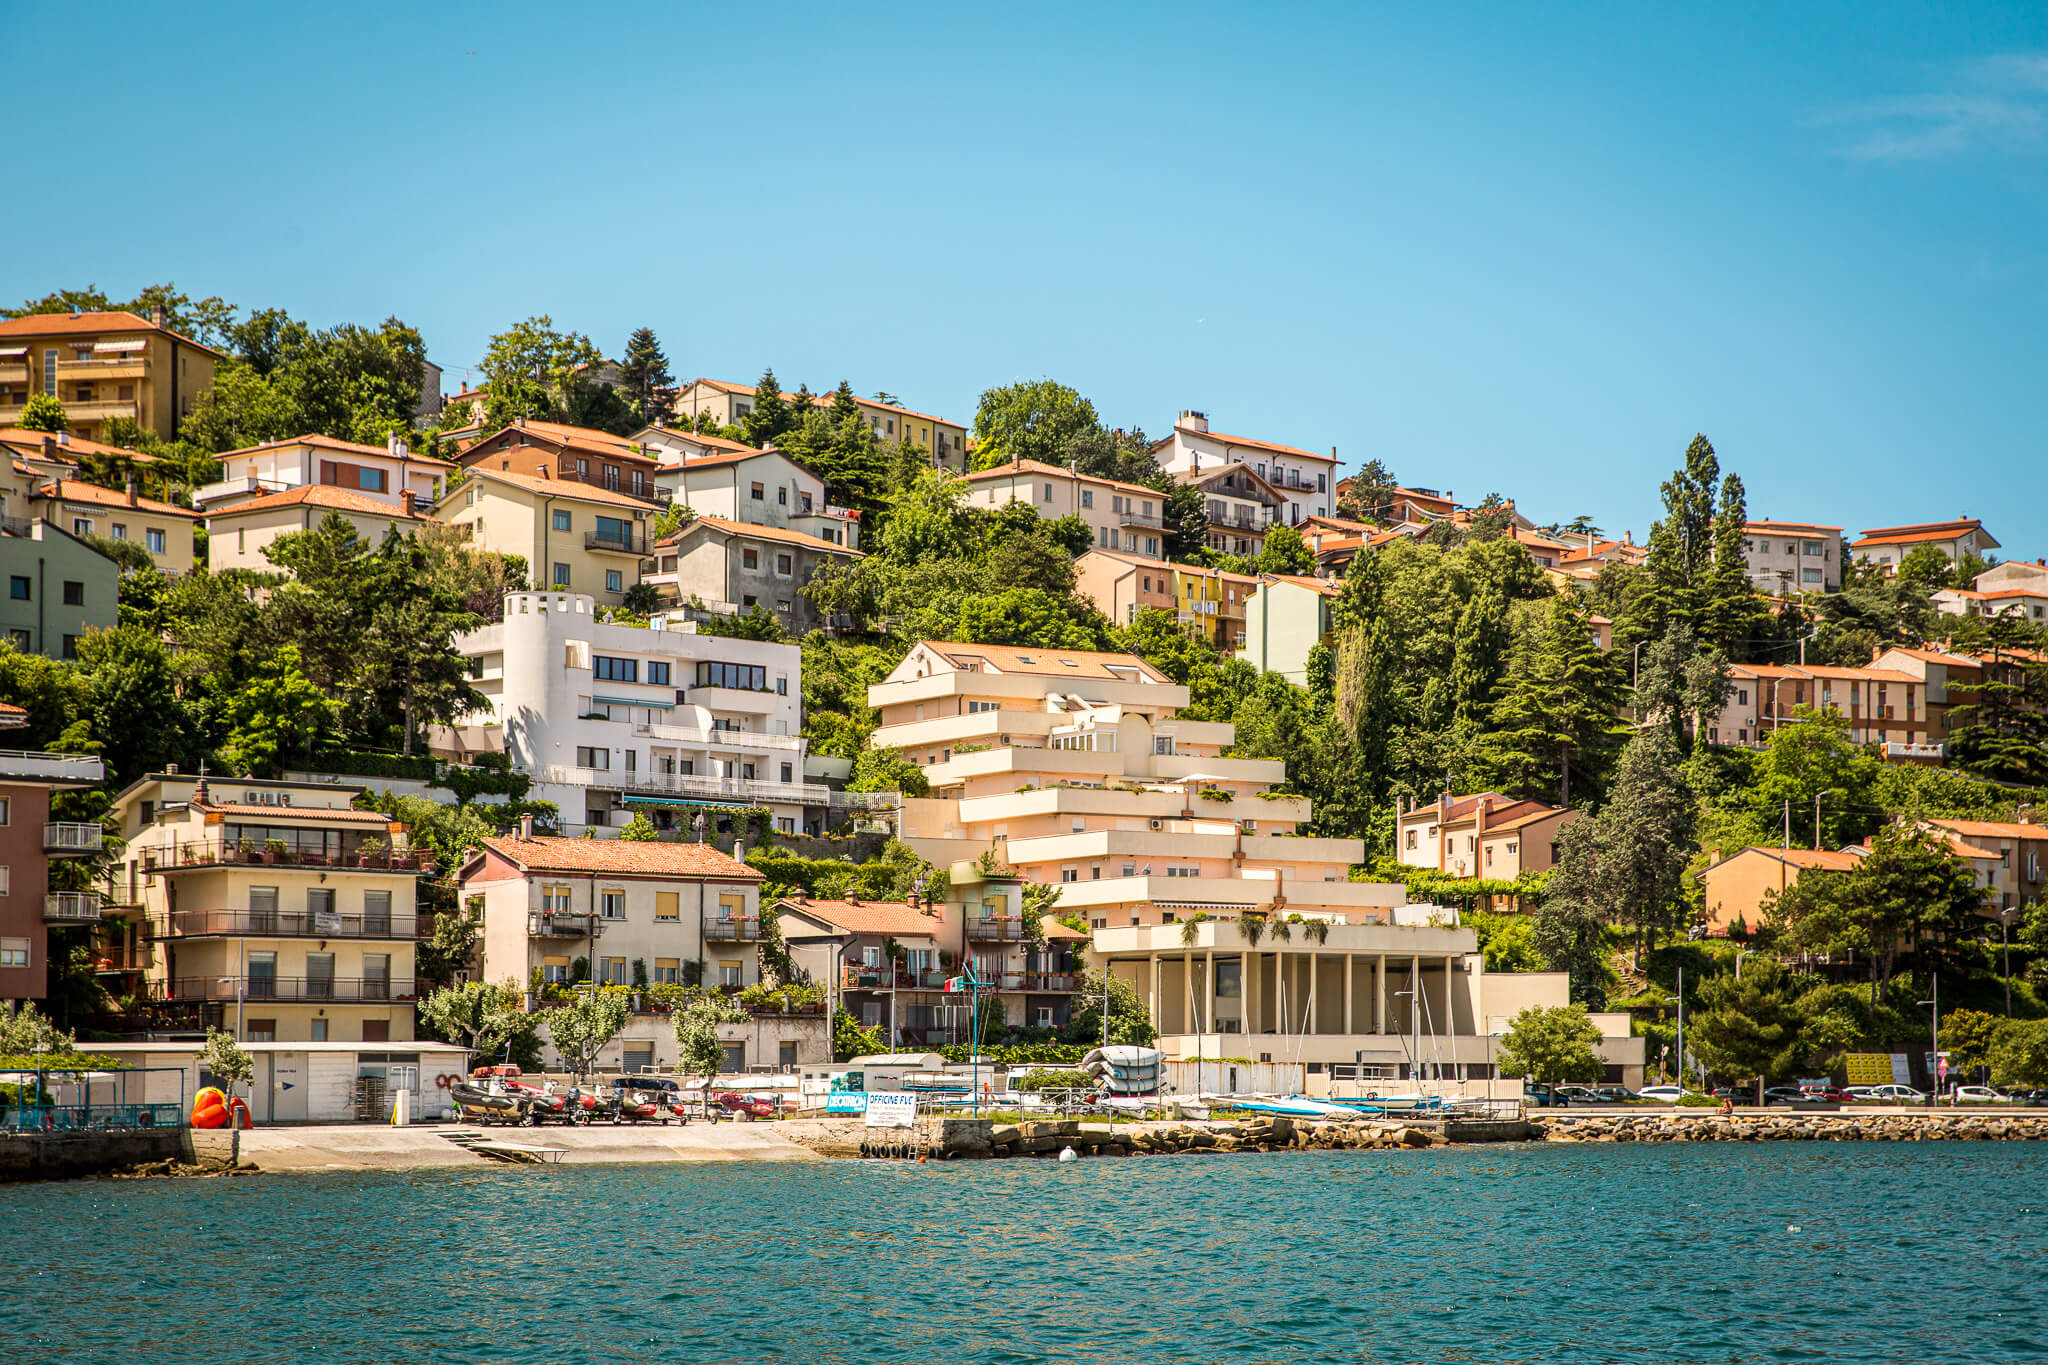 Grand homes on the coast of Muggia, Italy